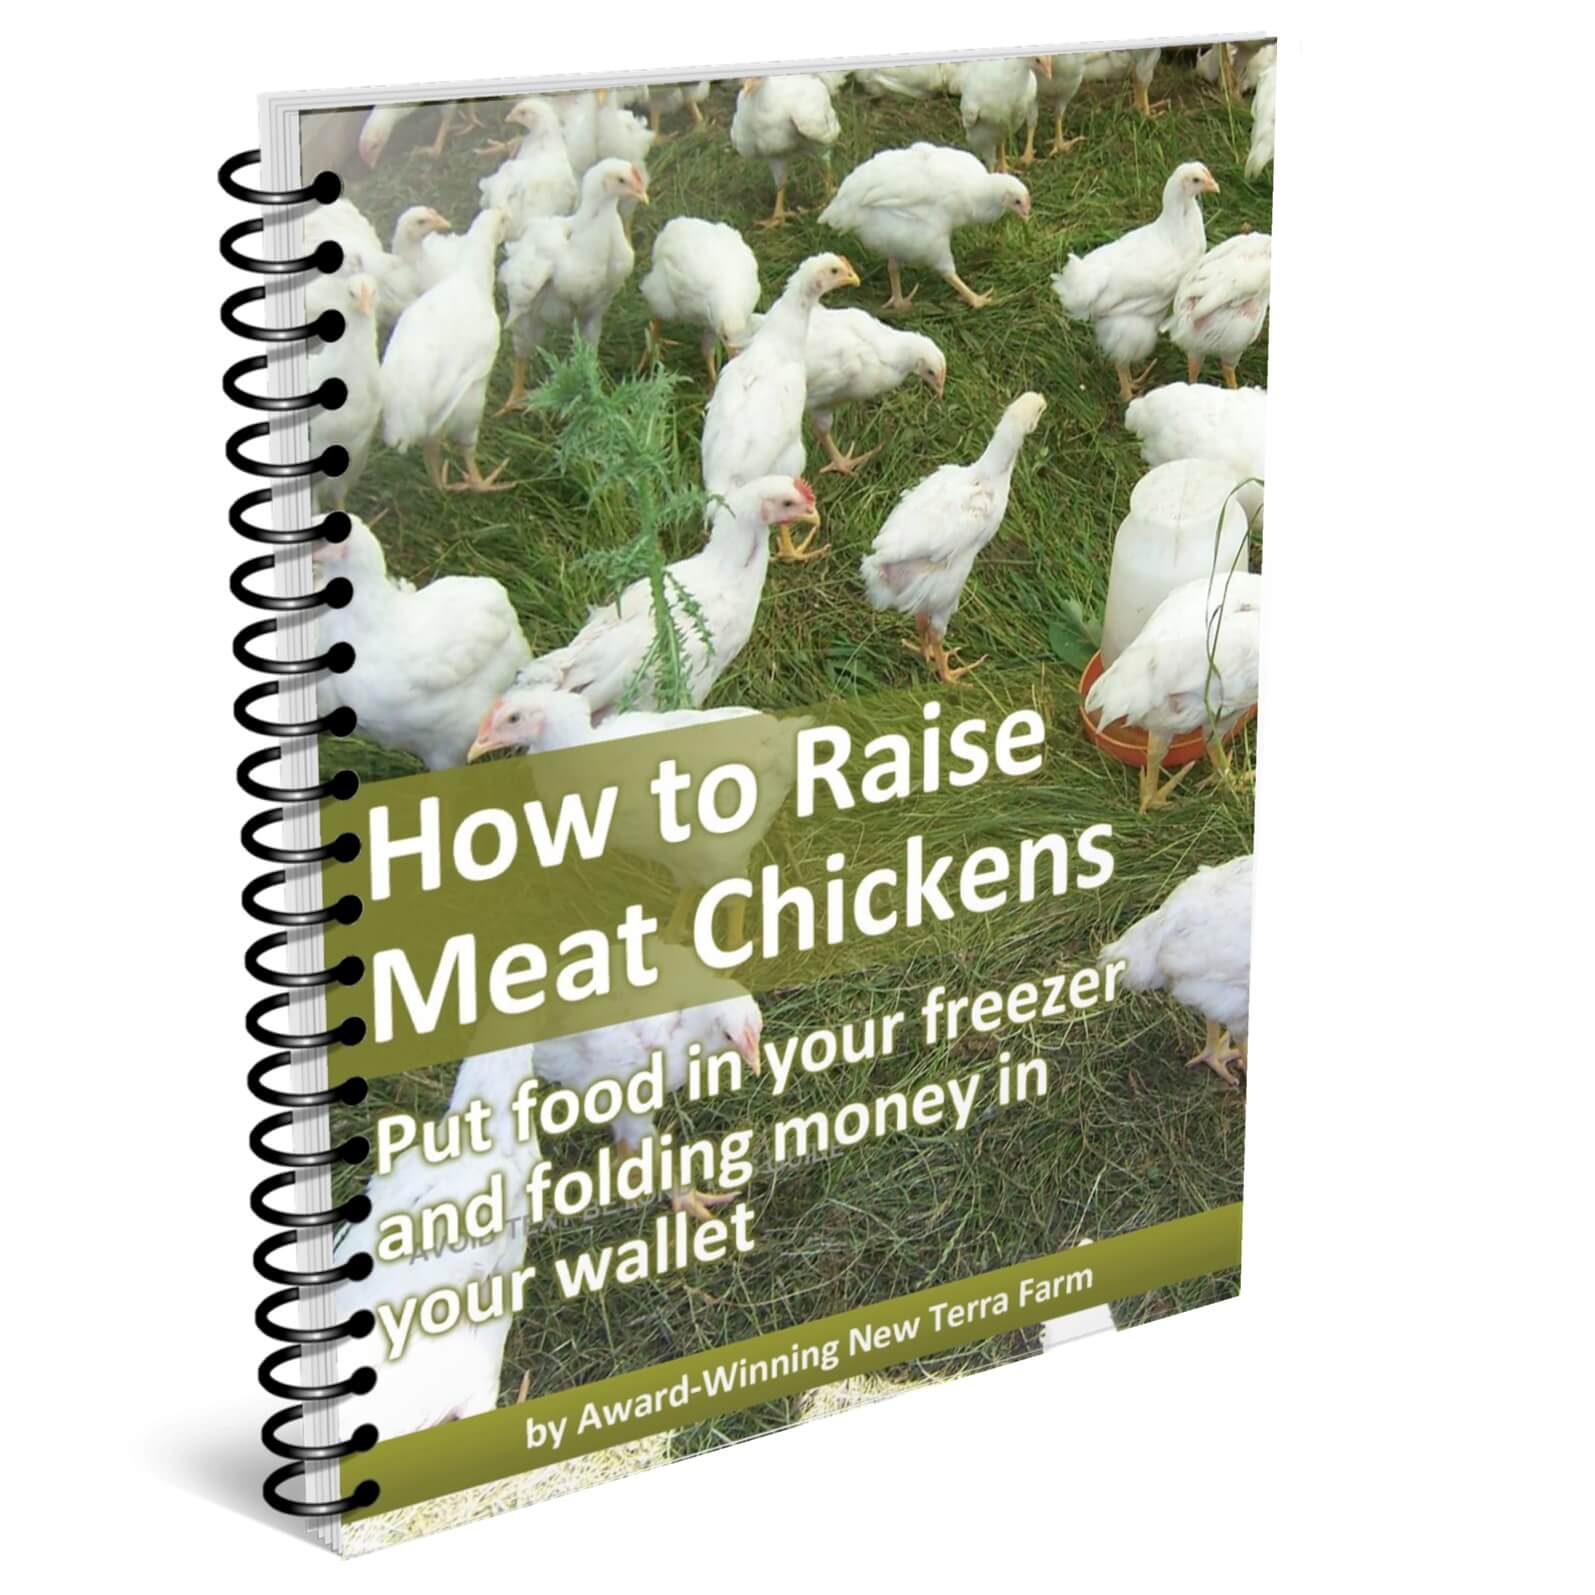 How to Raise Meat chickens book